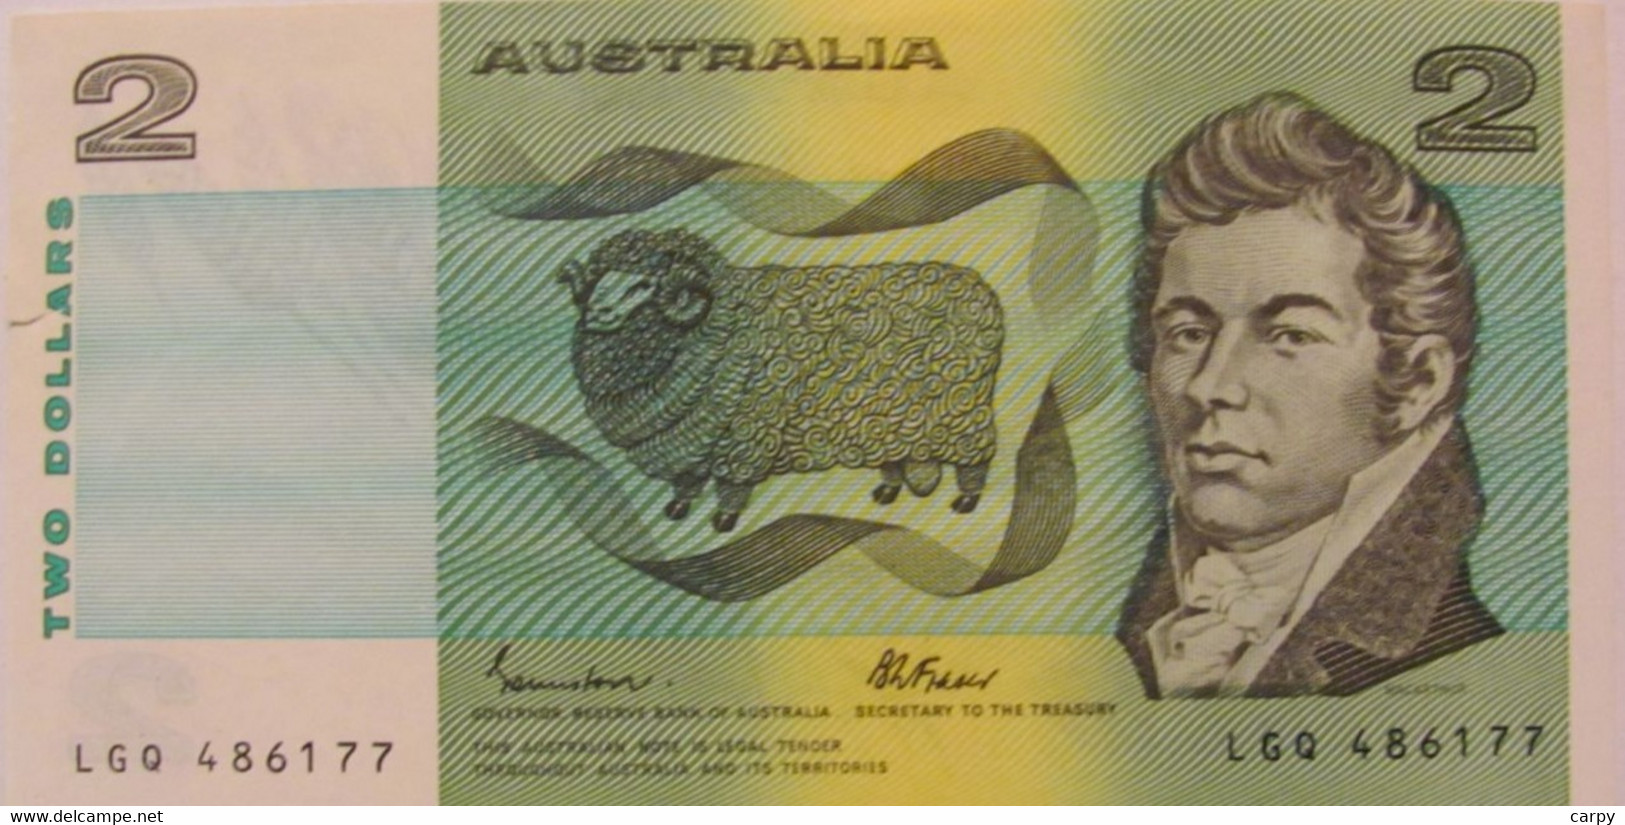 AUSTRALIA 2 Dollars 1985 / Signature Johnston & Fraser / Practically Is UNC, But Has A Small Marginal Tear At 21:00 Hour - 1974-94 Australia Reserve Bank (papier)